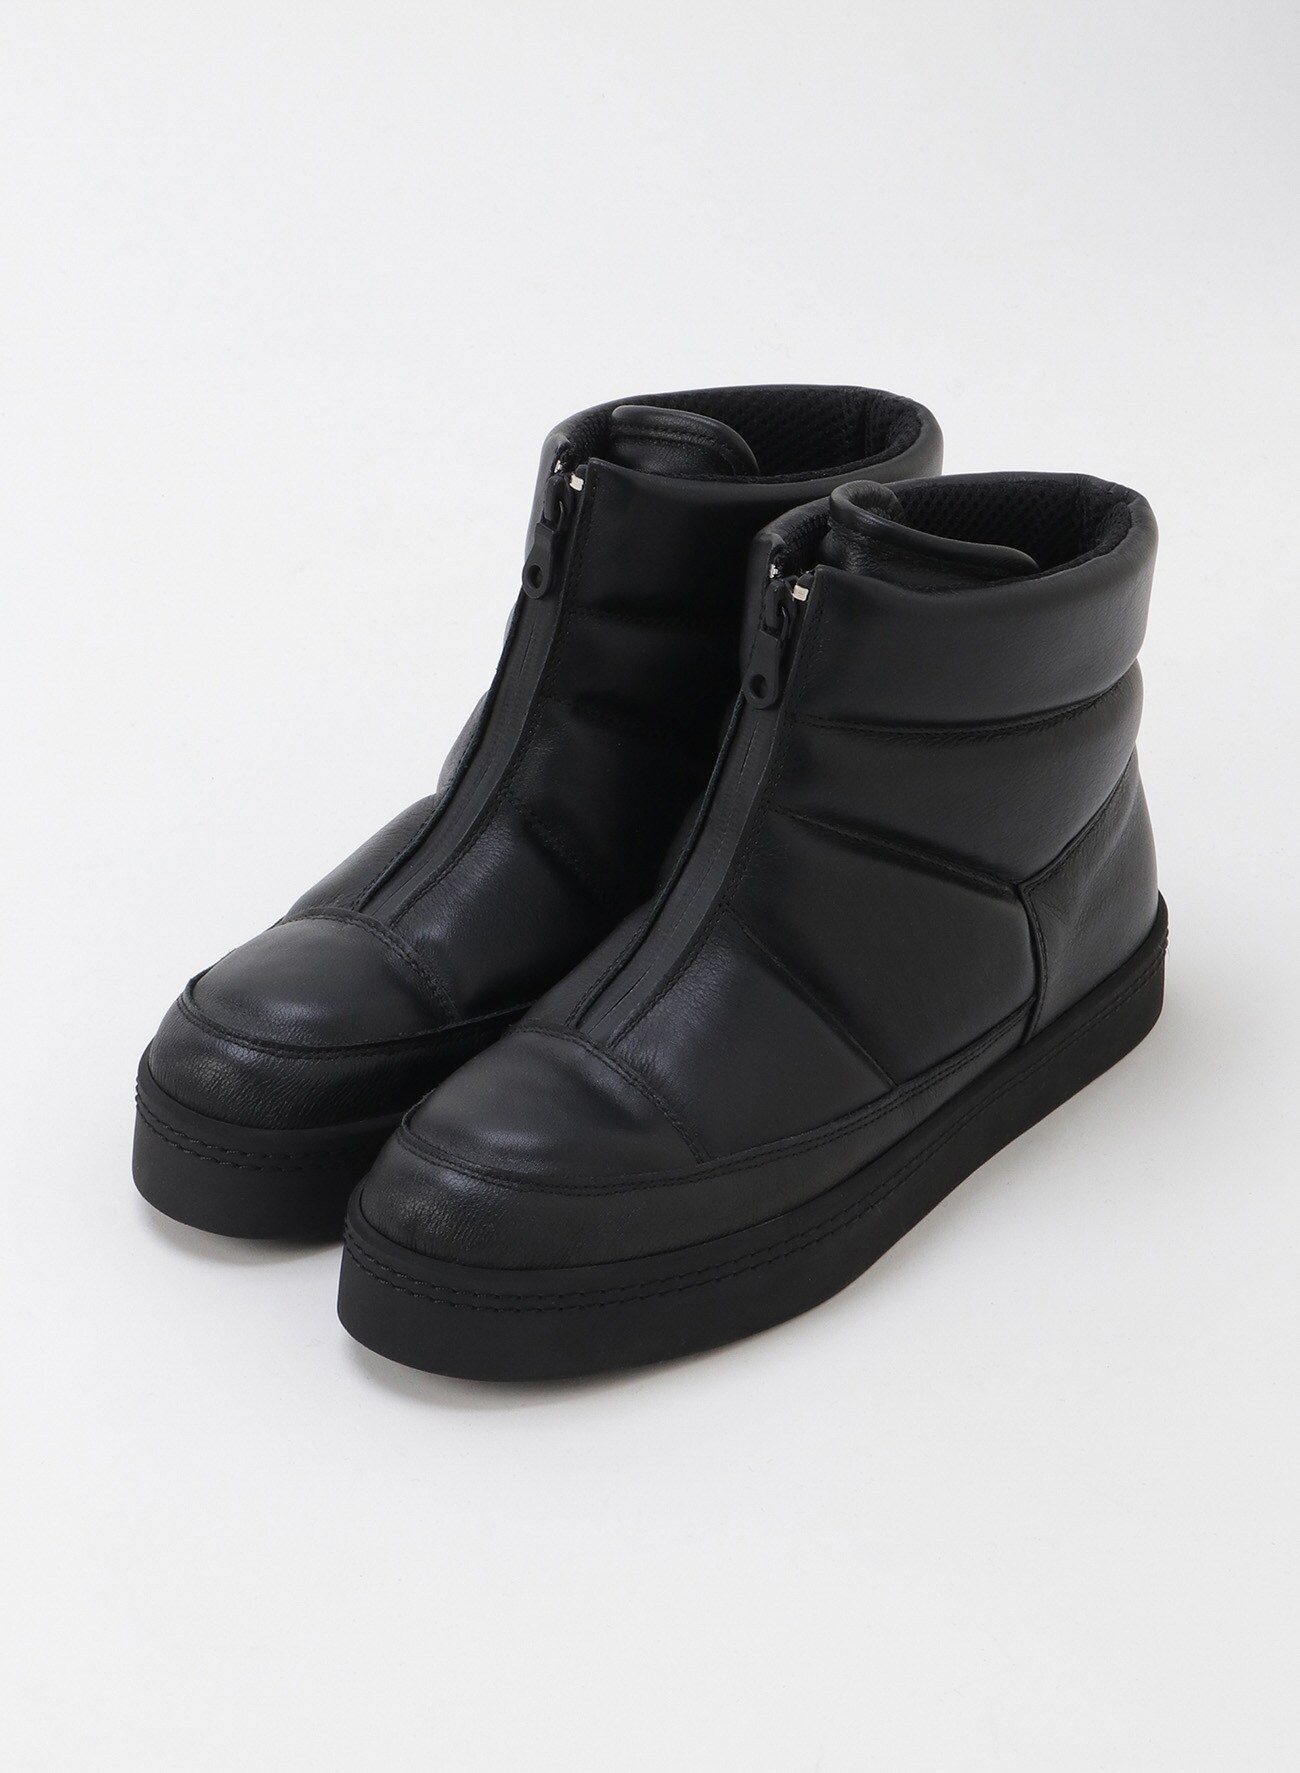 COW LEATHER SNOW BOOTS SNEAKERS